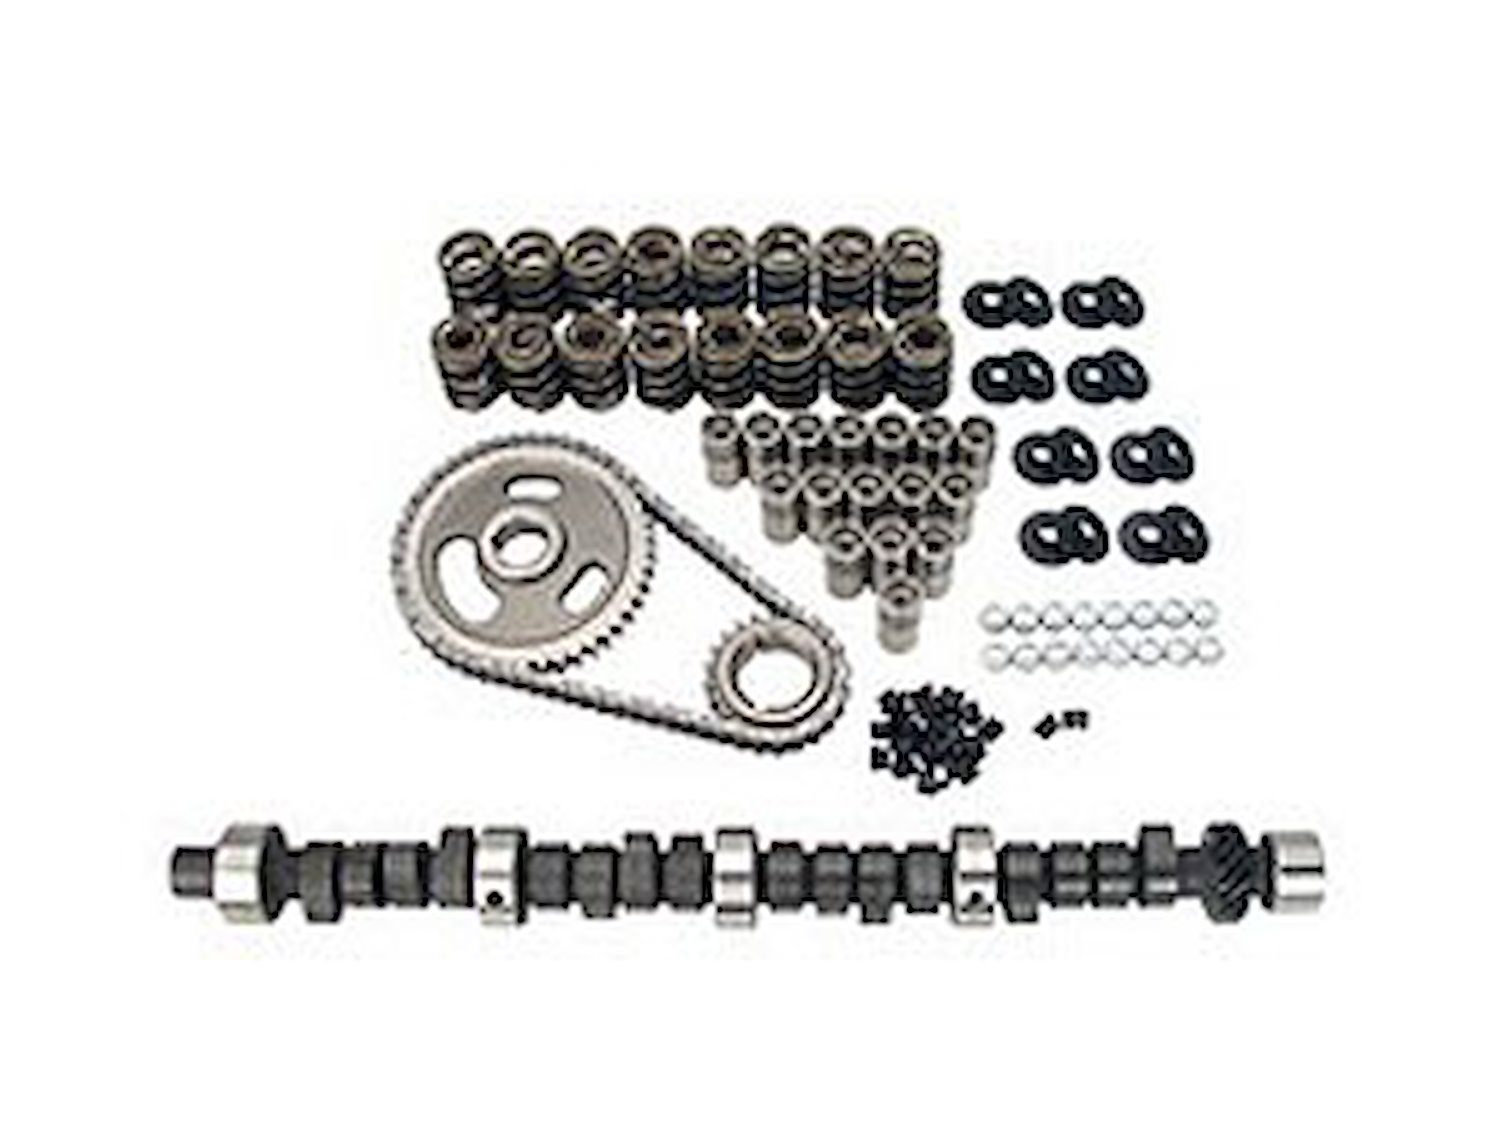 Xtreme Energy 268H Hydraulic Flat Tappet Camshaft Complete Kit Lift .477"/.480" Duration 268°/280° RPM Range 1600-5800